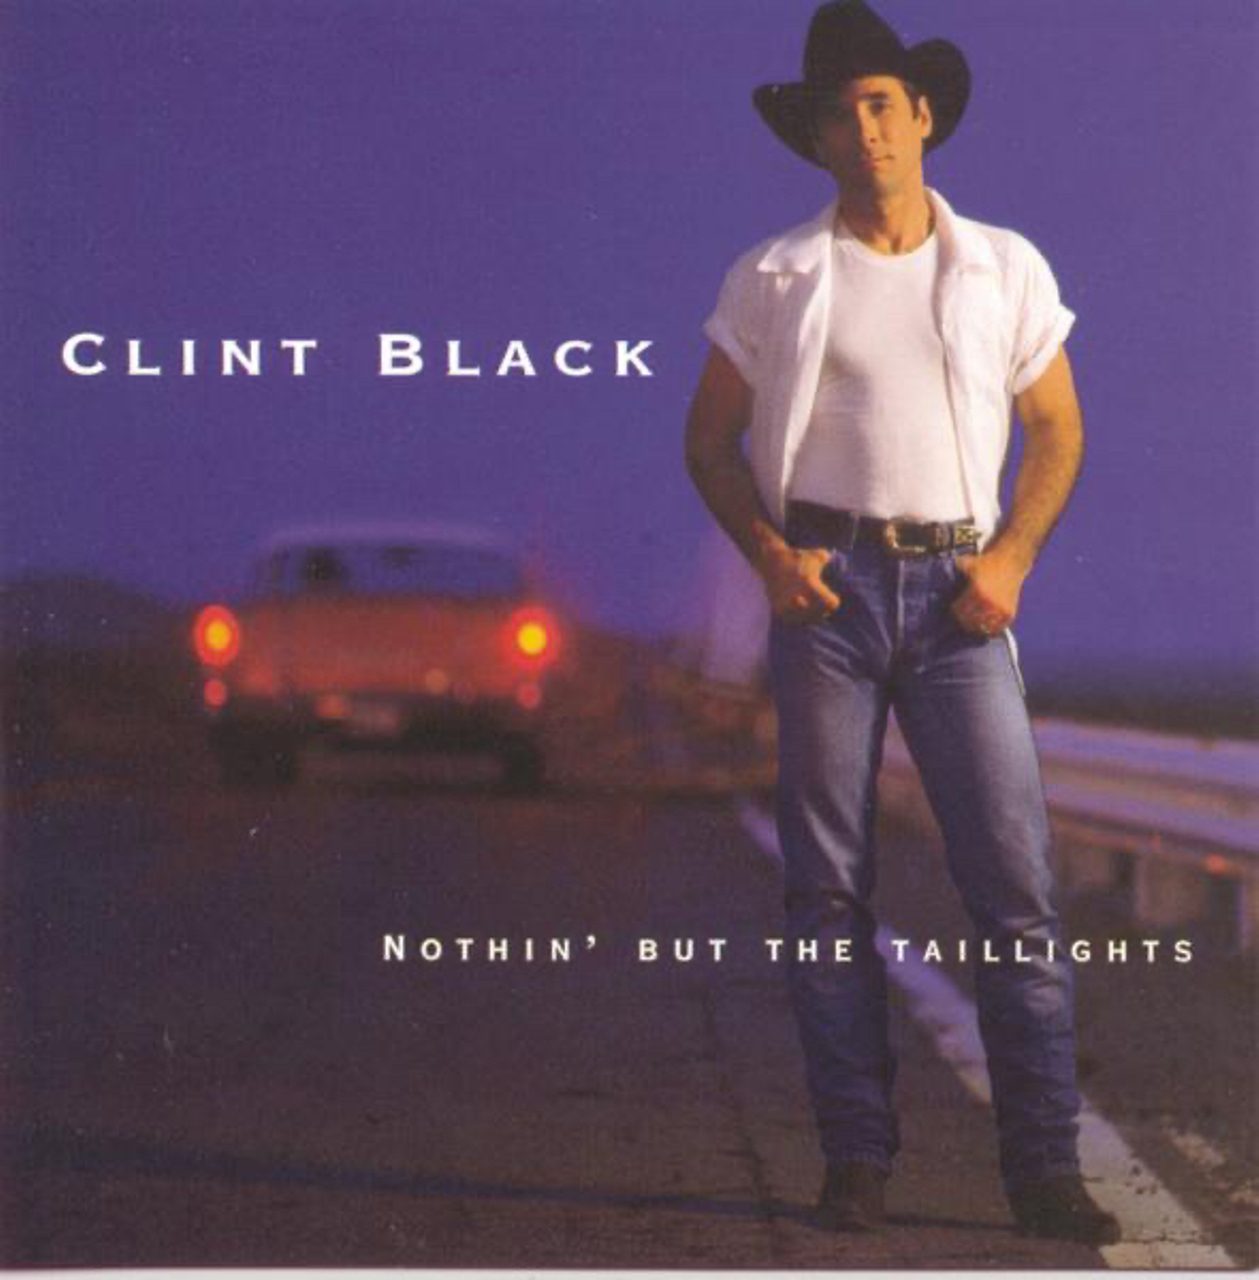 Clint Black – Nothin’ But The Taillights cover album